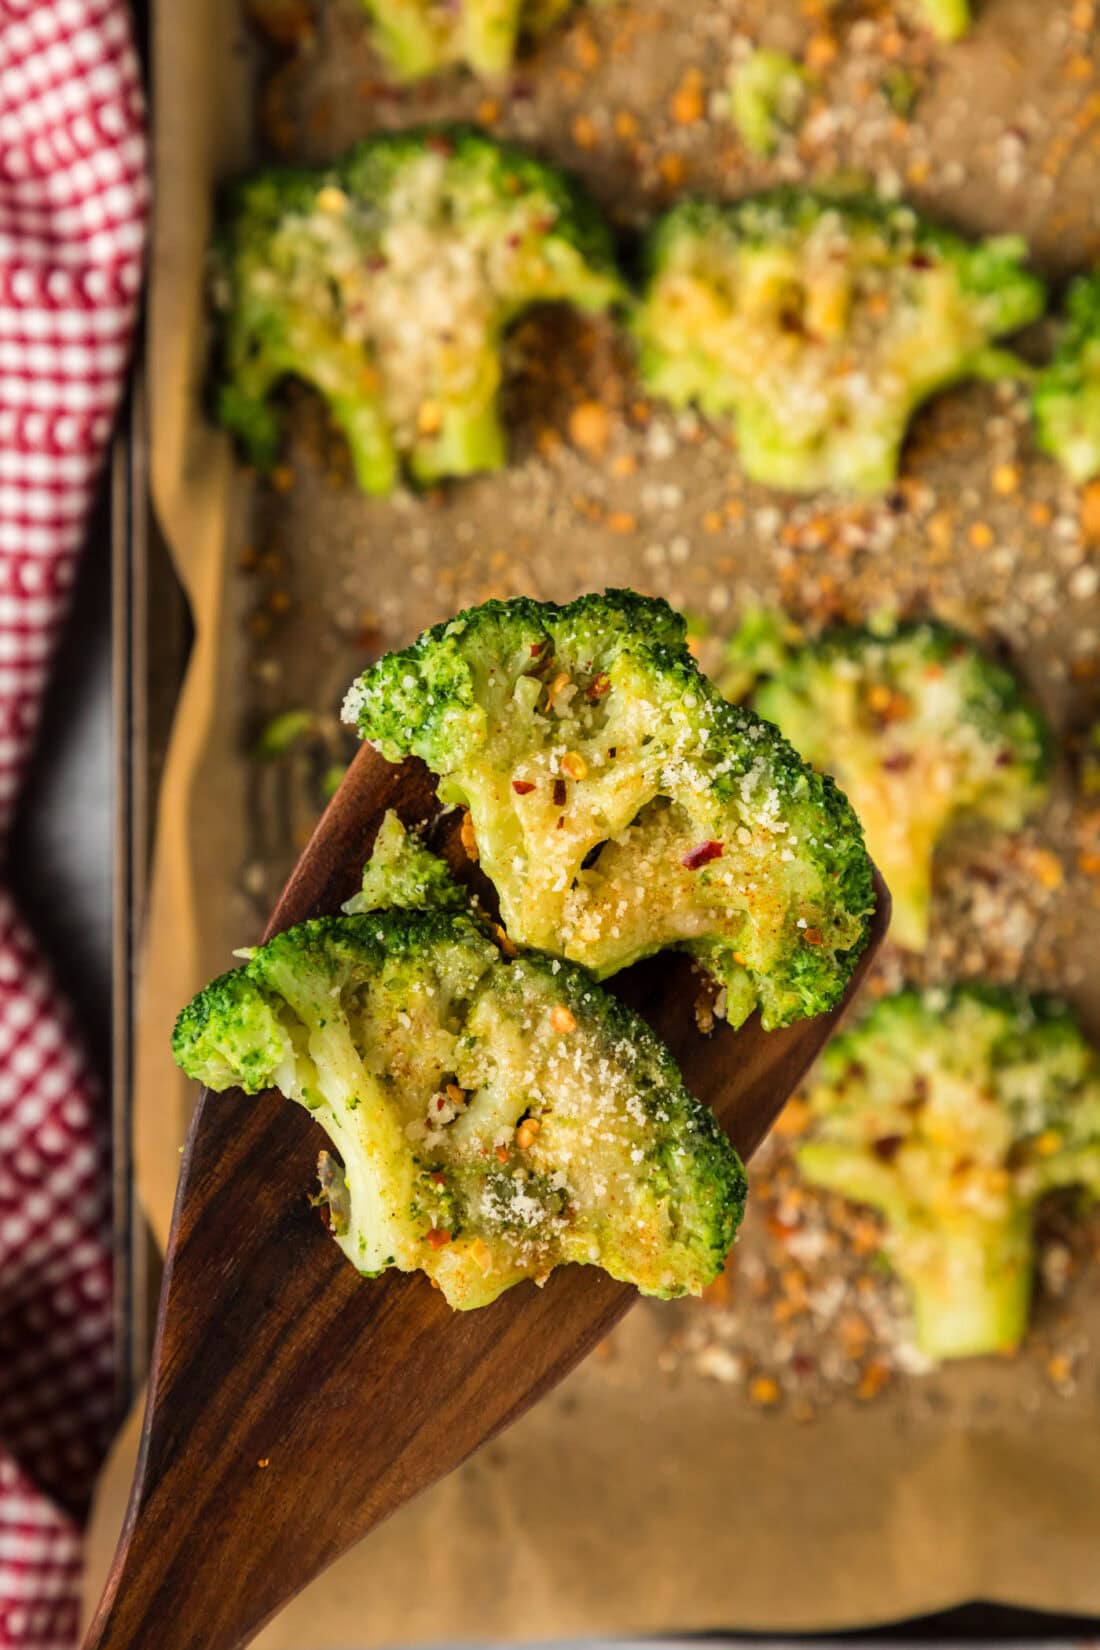 Two Smashed Broccoli pieces on a spatula